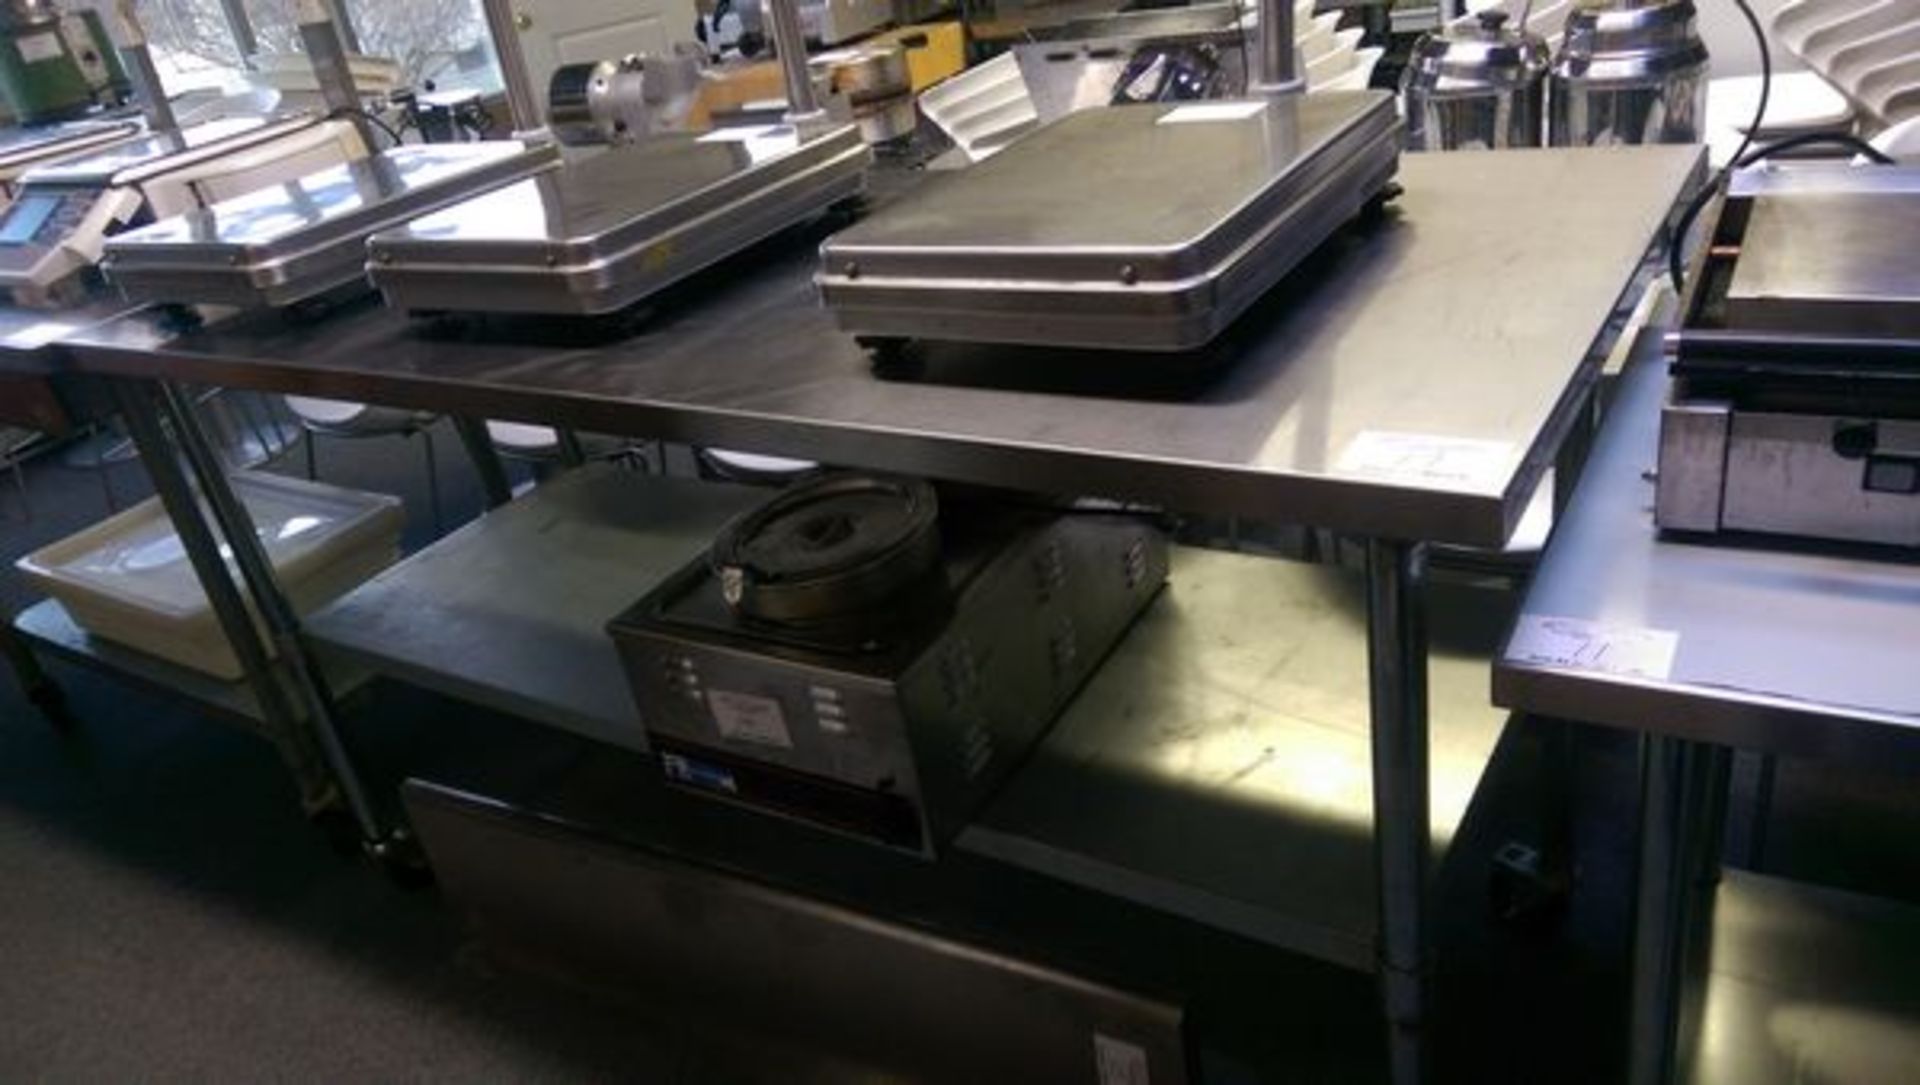 30 x 72" 2 Tier Stainless Steel Work Table on Casters